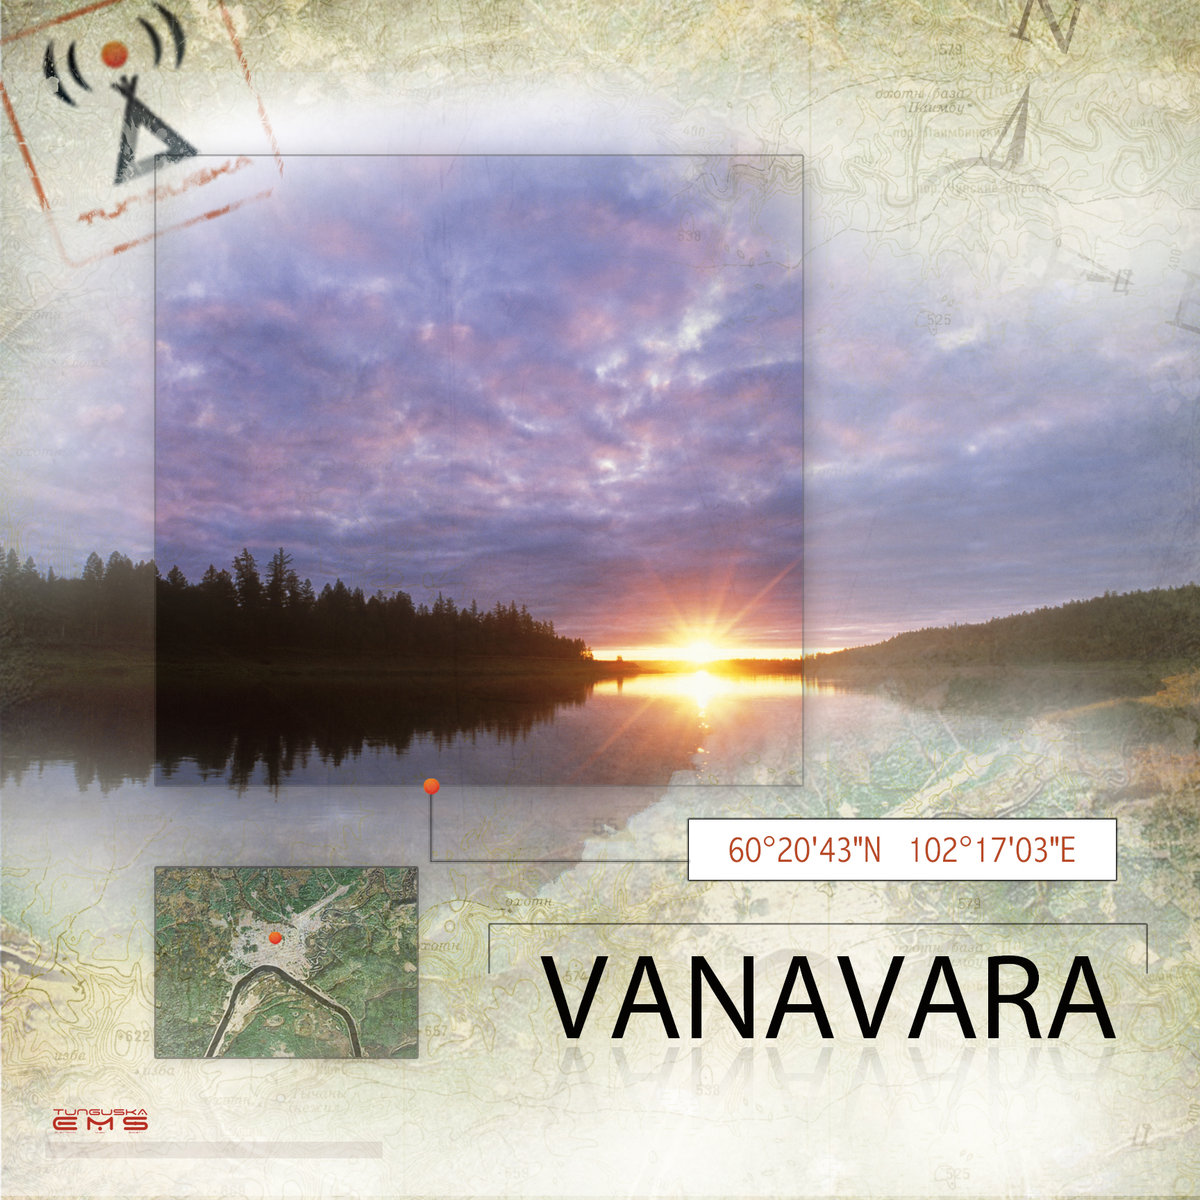 Project "?!" - Animation The Future @ 'Point - Vanavara' album (electronic, ambient)